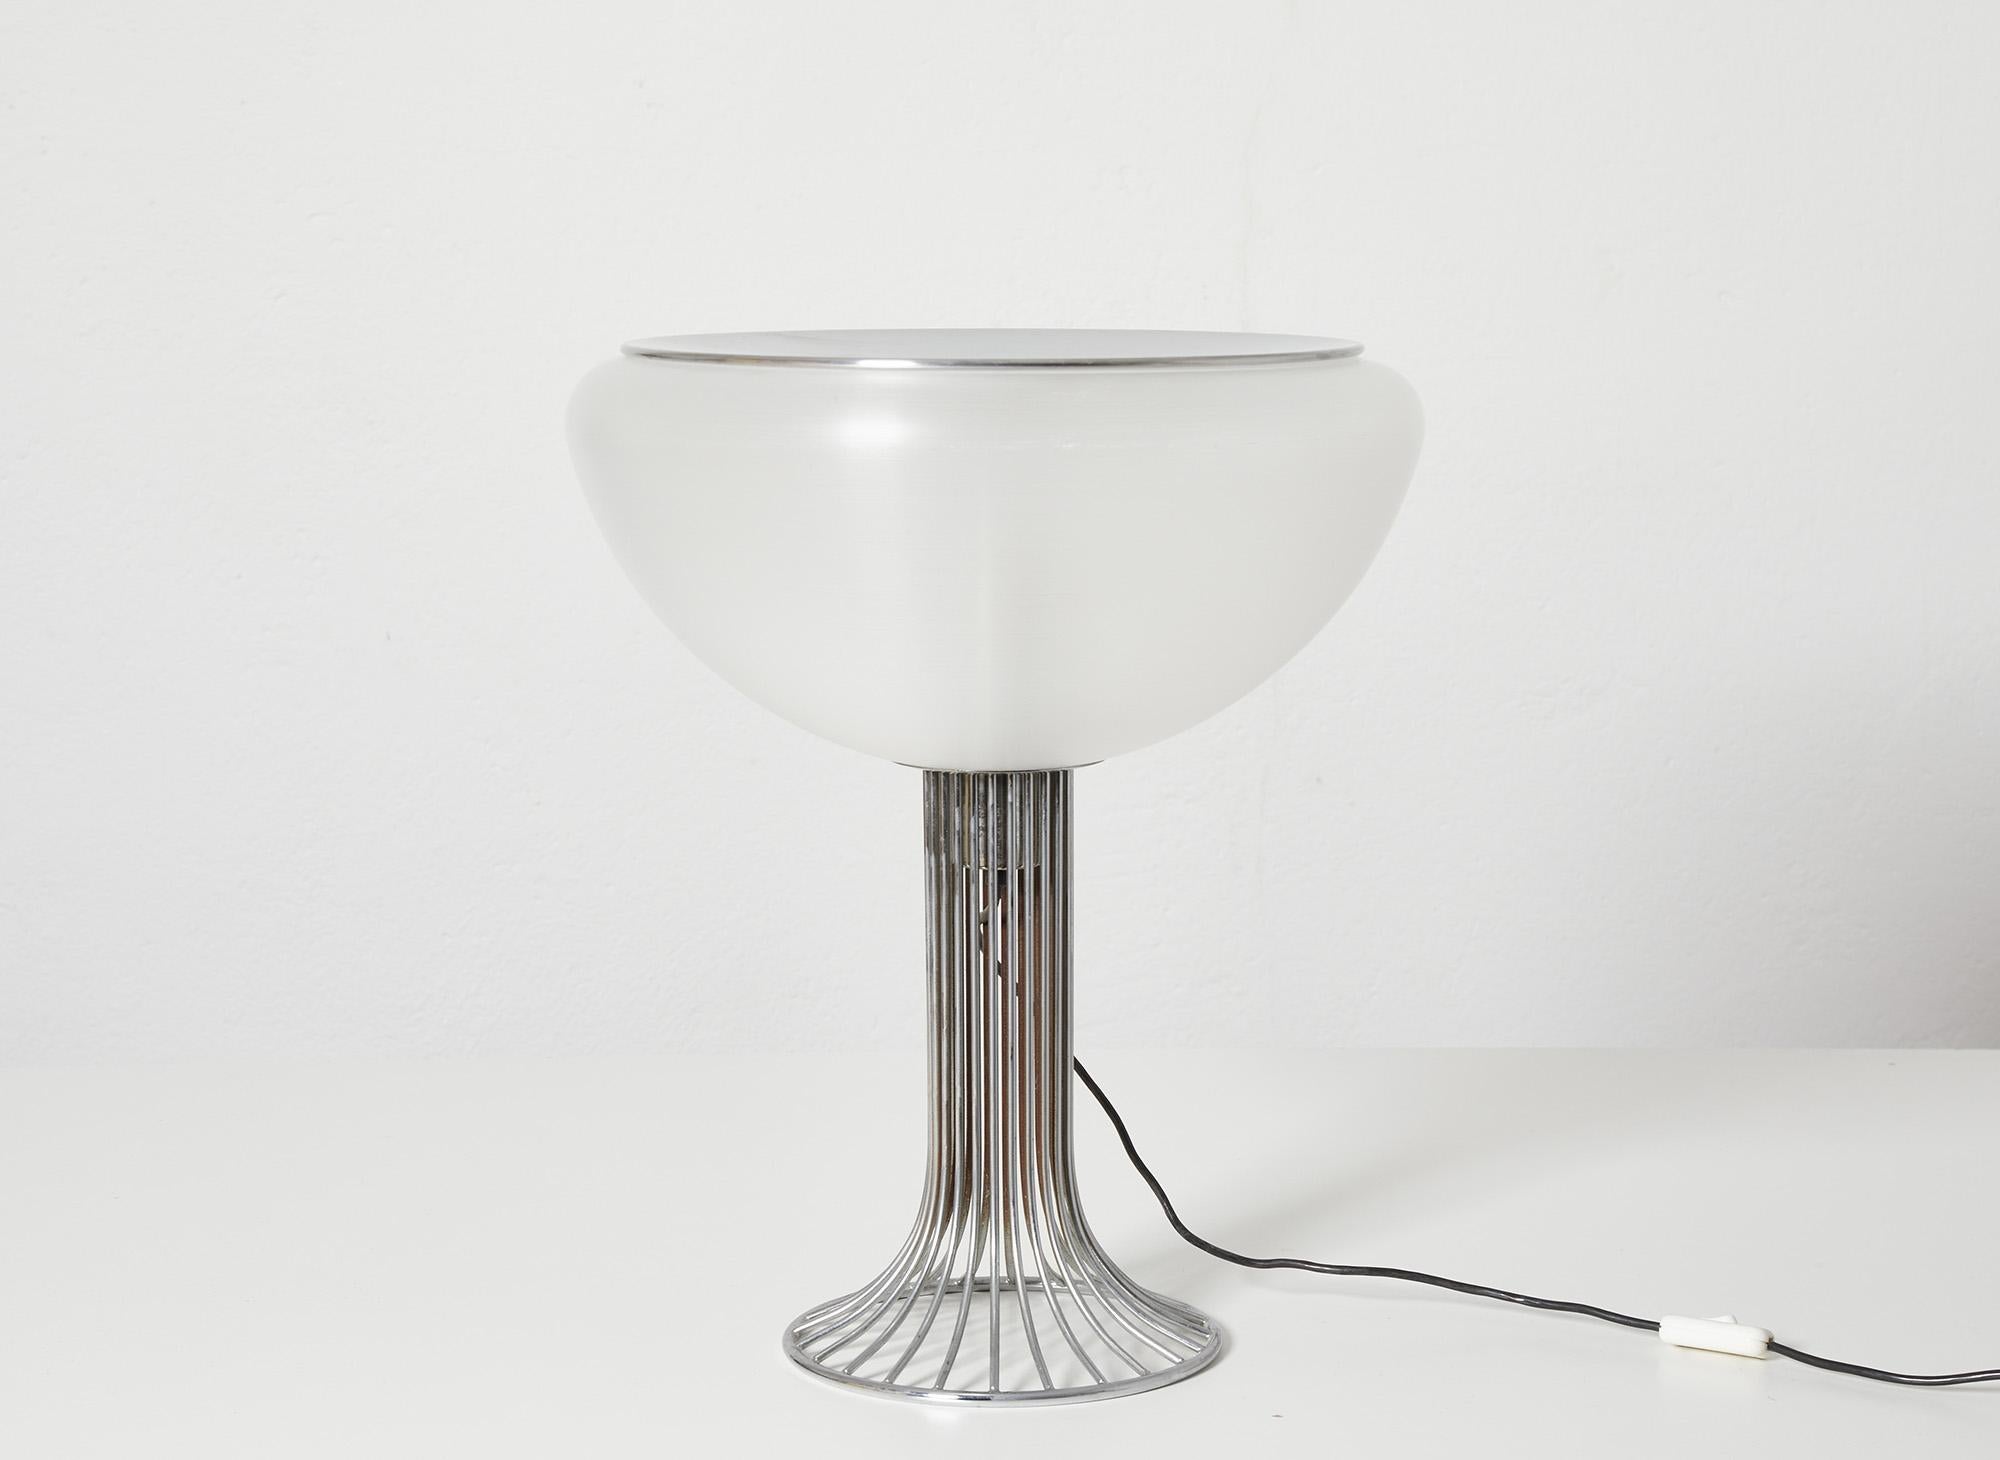 Moana table lamp designed by Luigi Massoni around 1968

Produced by D.H (Design House) Guzzini, Italy 1968

Tulip shaped base and structure in chromed metal wire with metacrylate shade and chromed metal diffuser.

The chromed structure is in good